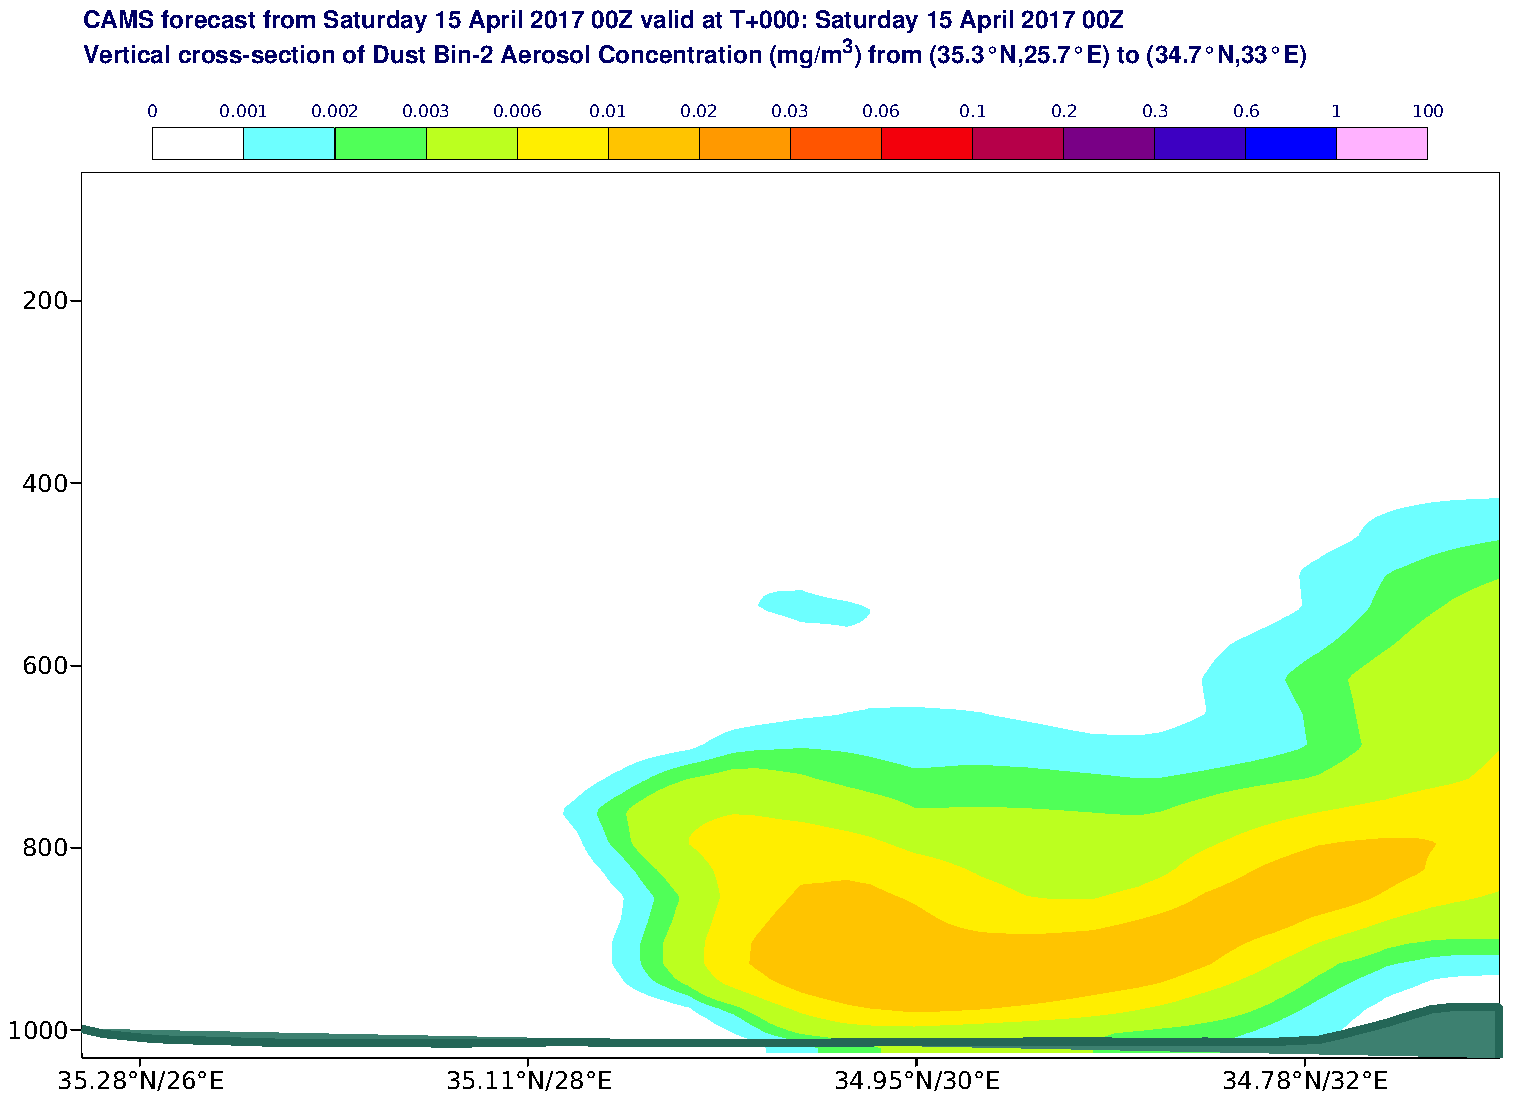 Vertical cross-section of Dust Bin-2 Aerosol Concentration (mg/m3) valid at T0 - 2017-04-15 00:00